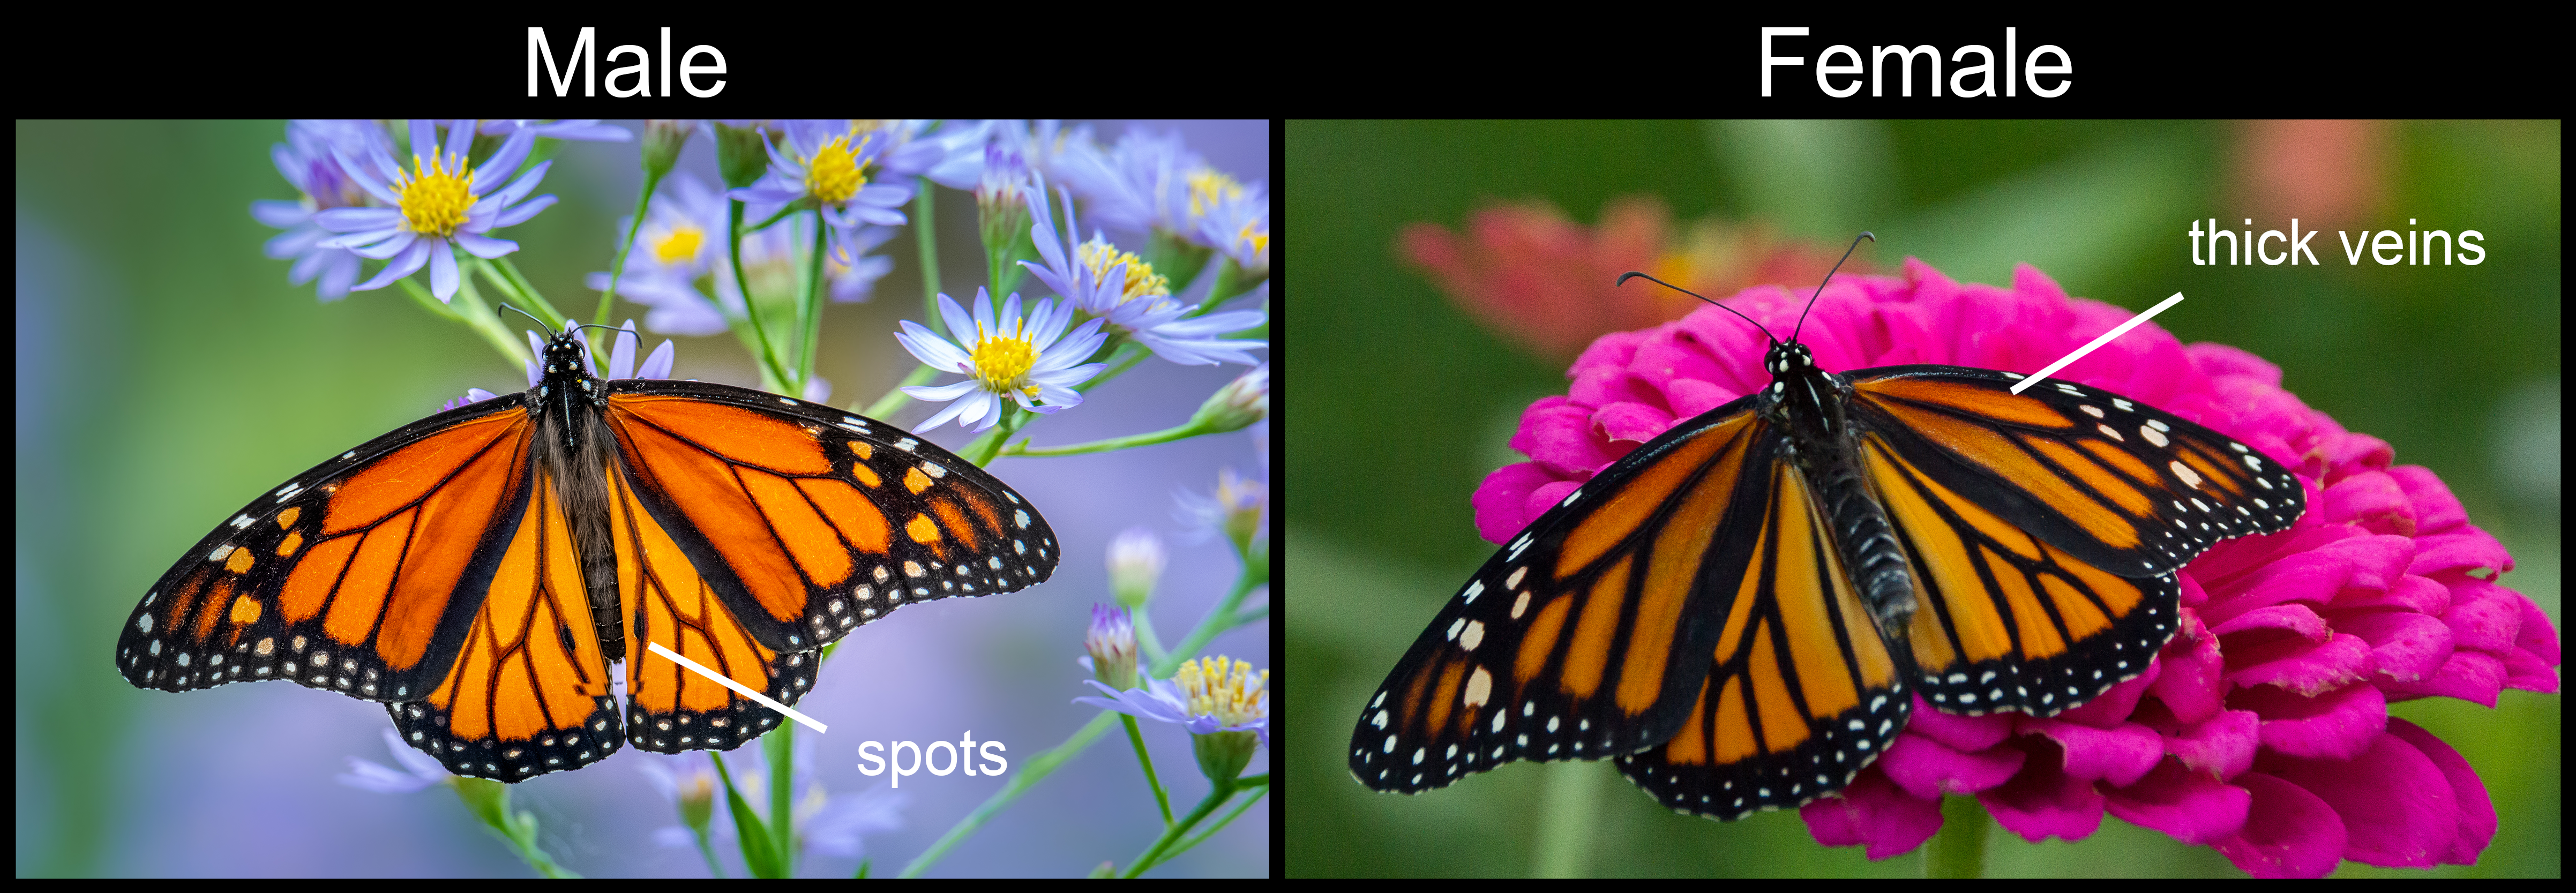 Side by side comparison of a male and female monarch butterfly.